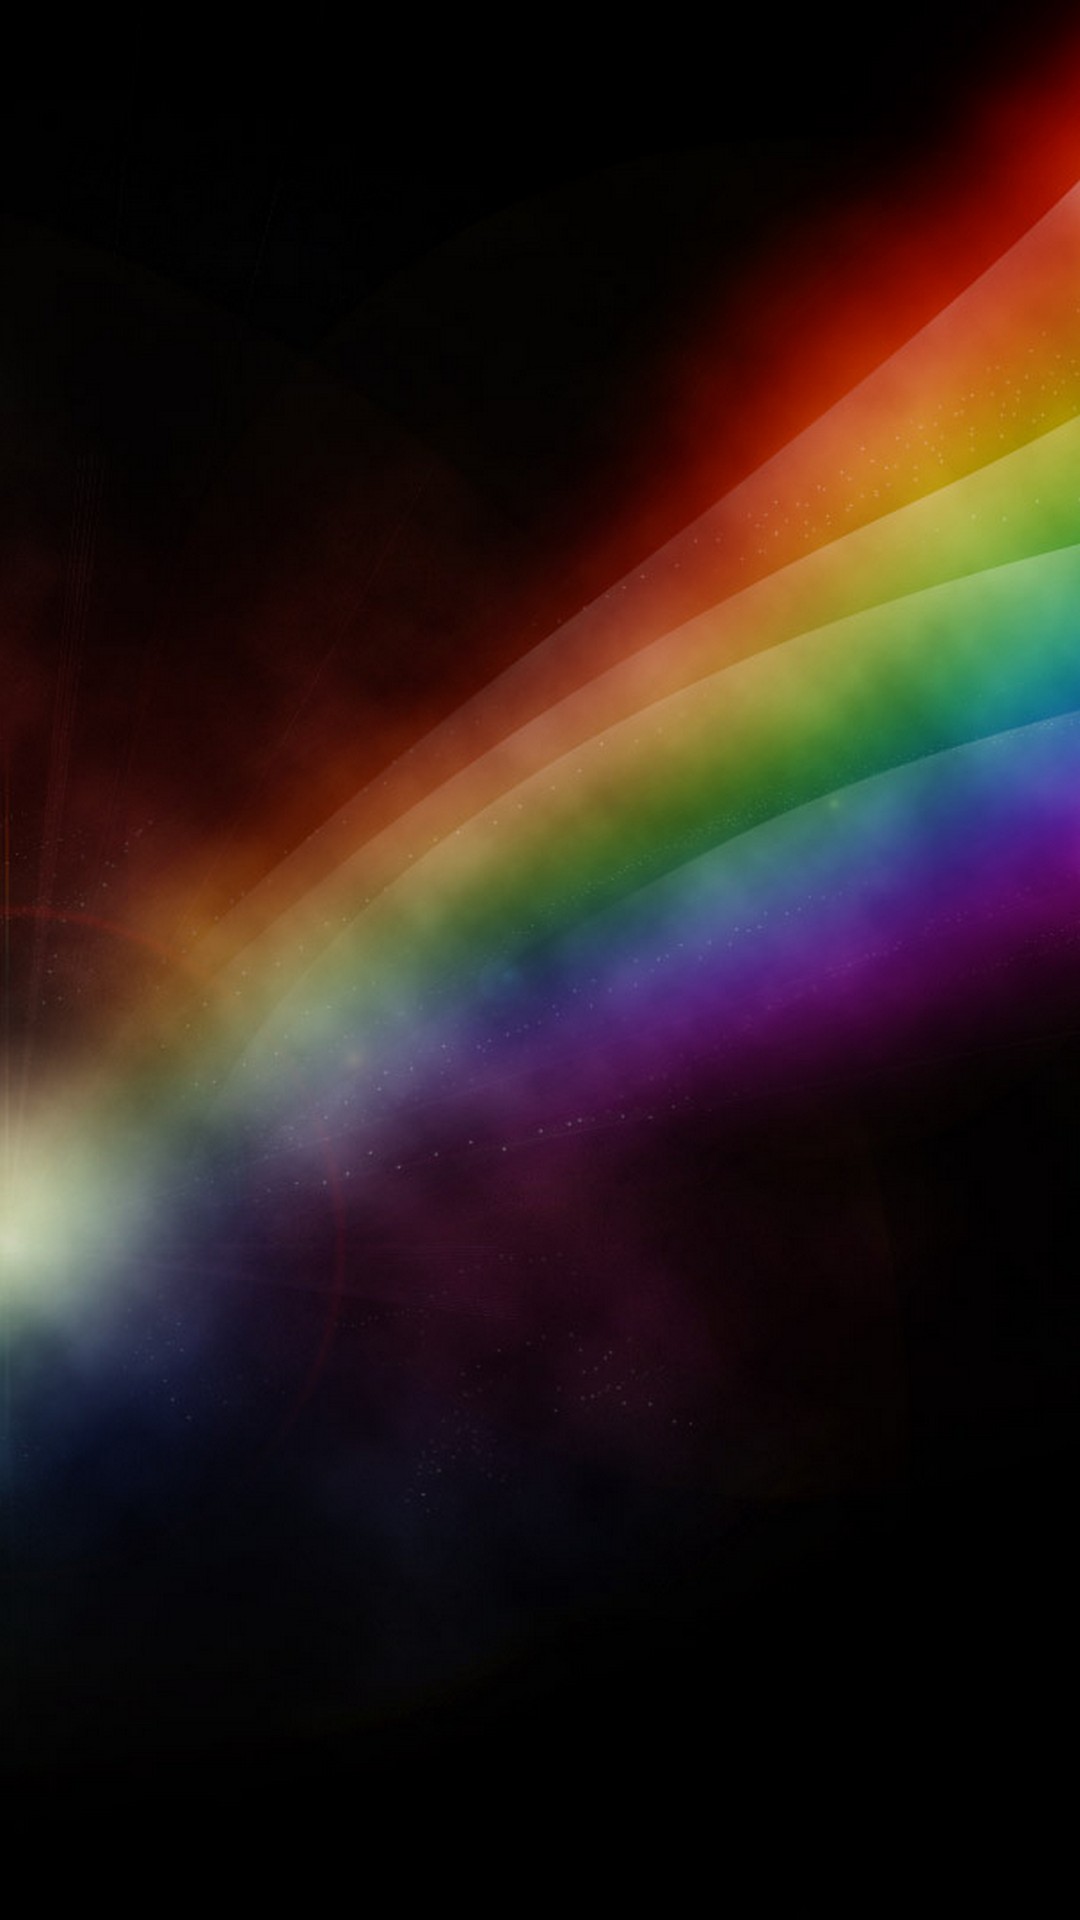 Rainbow Wallpaper For Android with image resolution 1080x1920 pixel. You can make this wallpaper for your Android backgrounds, Tablet, Smartphones Screensavers and Mobile Phone Lock Screen